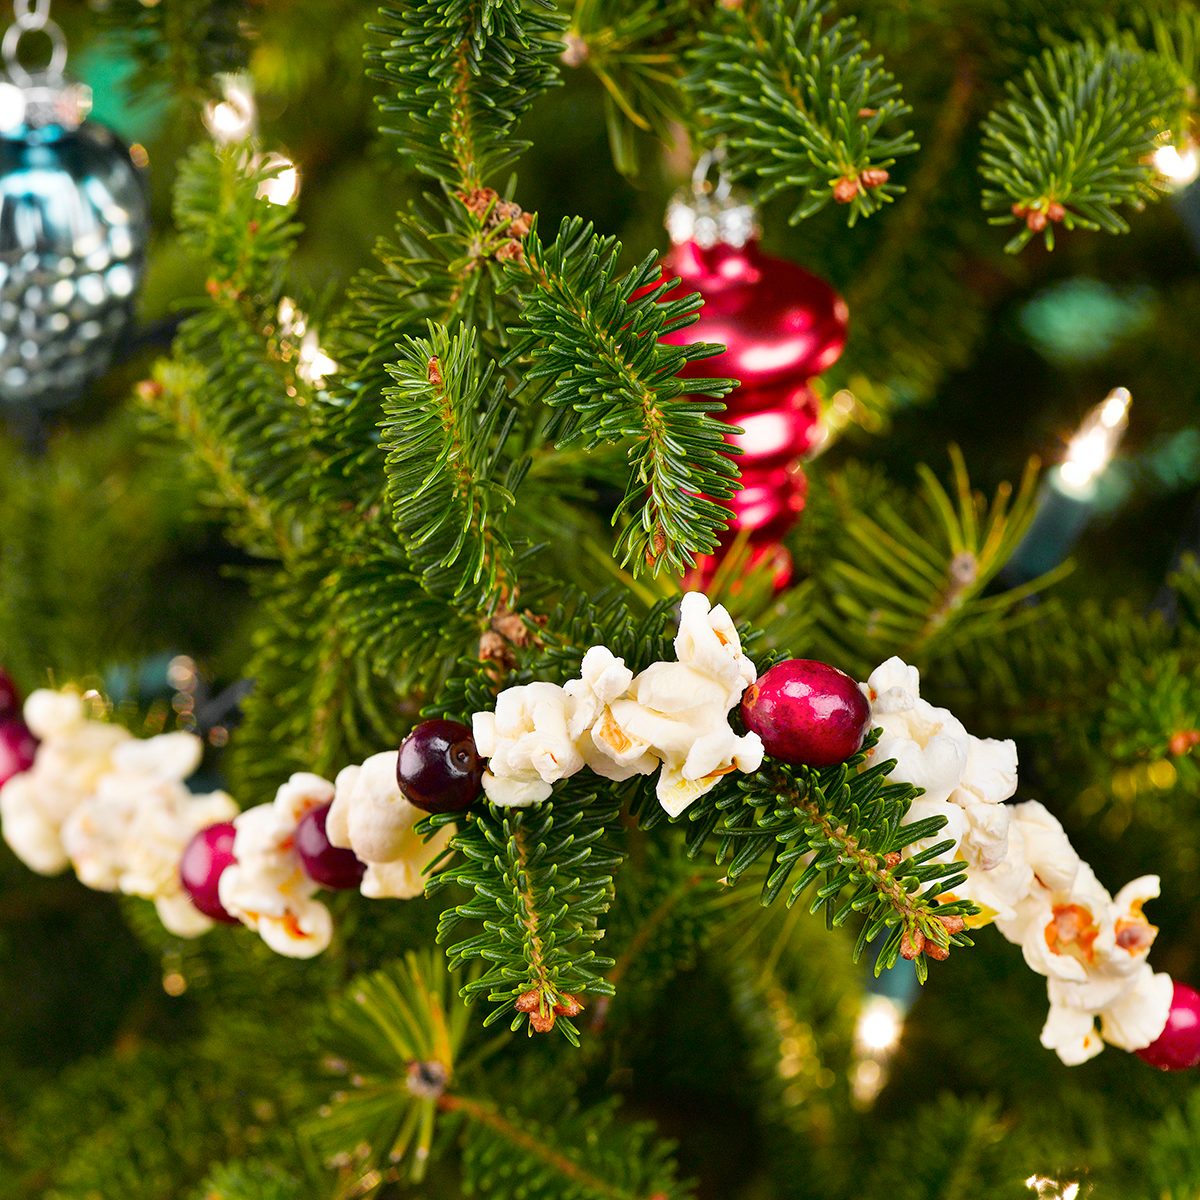 Close-up of Christmas tree with popcorn-cranberry garland